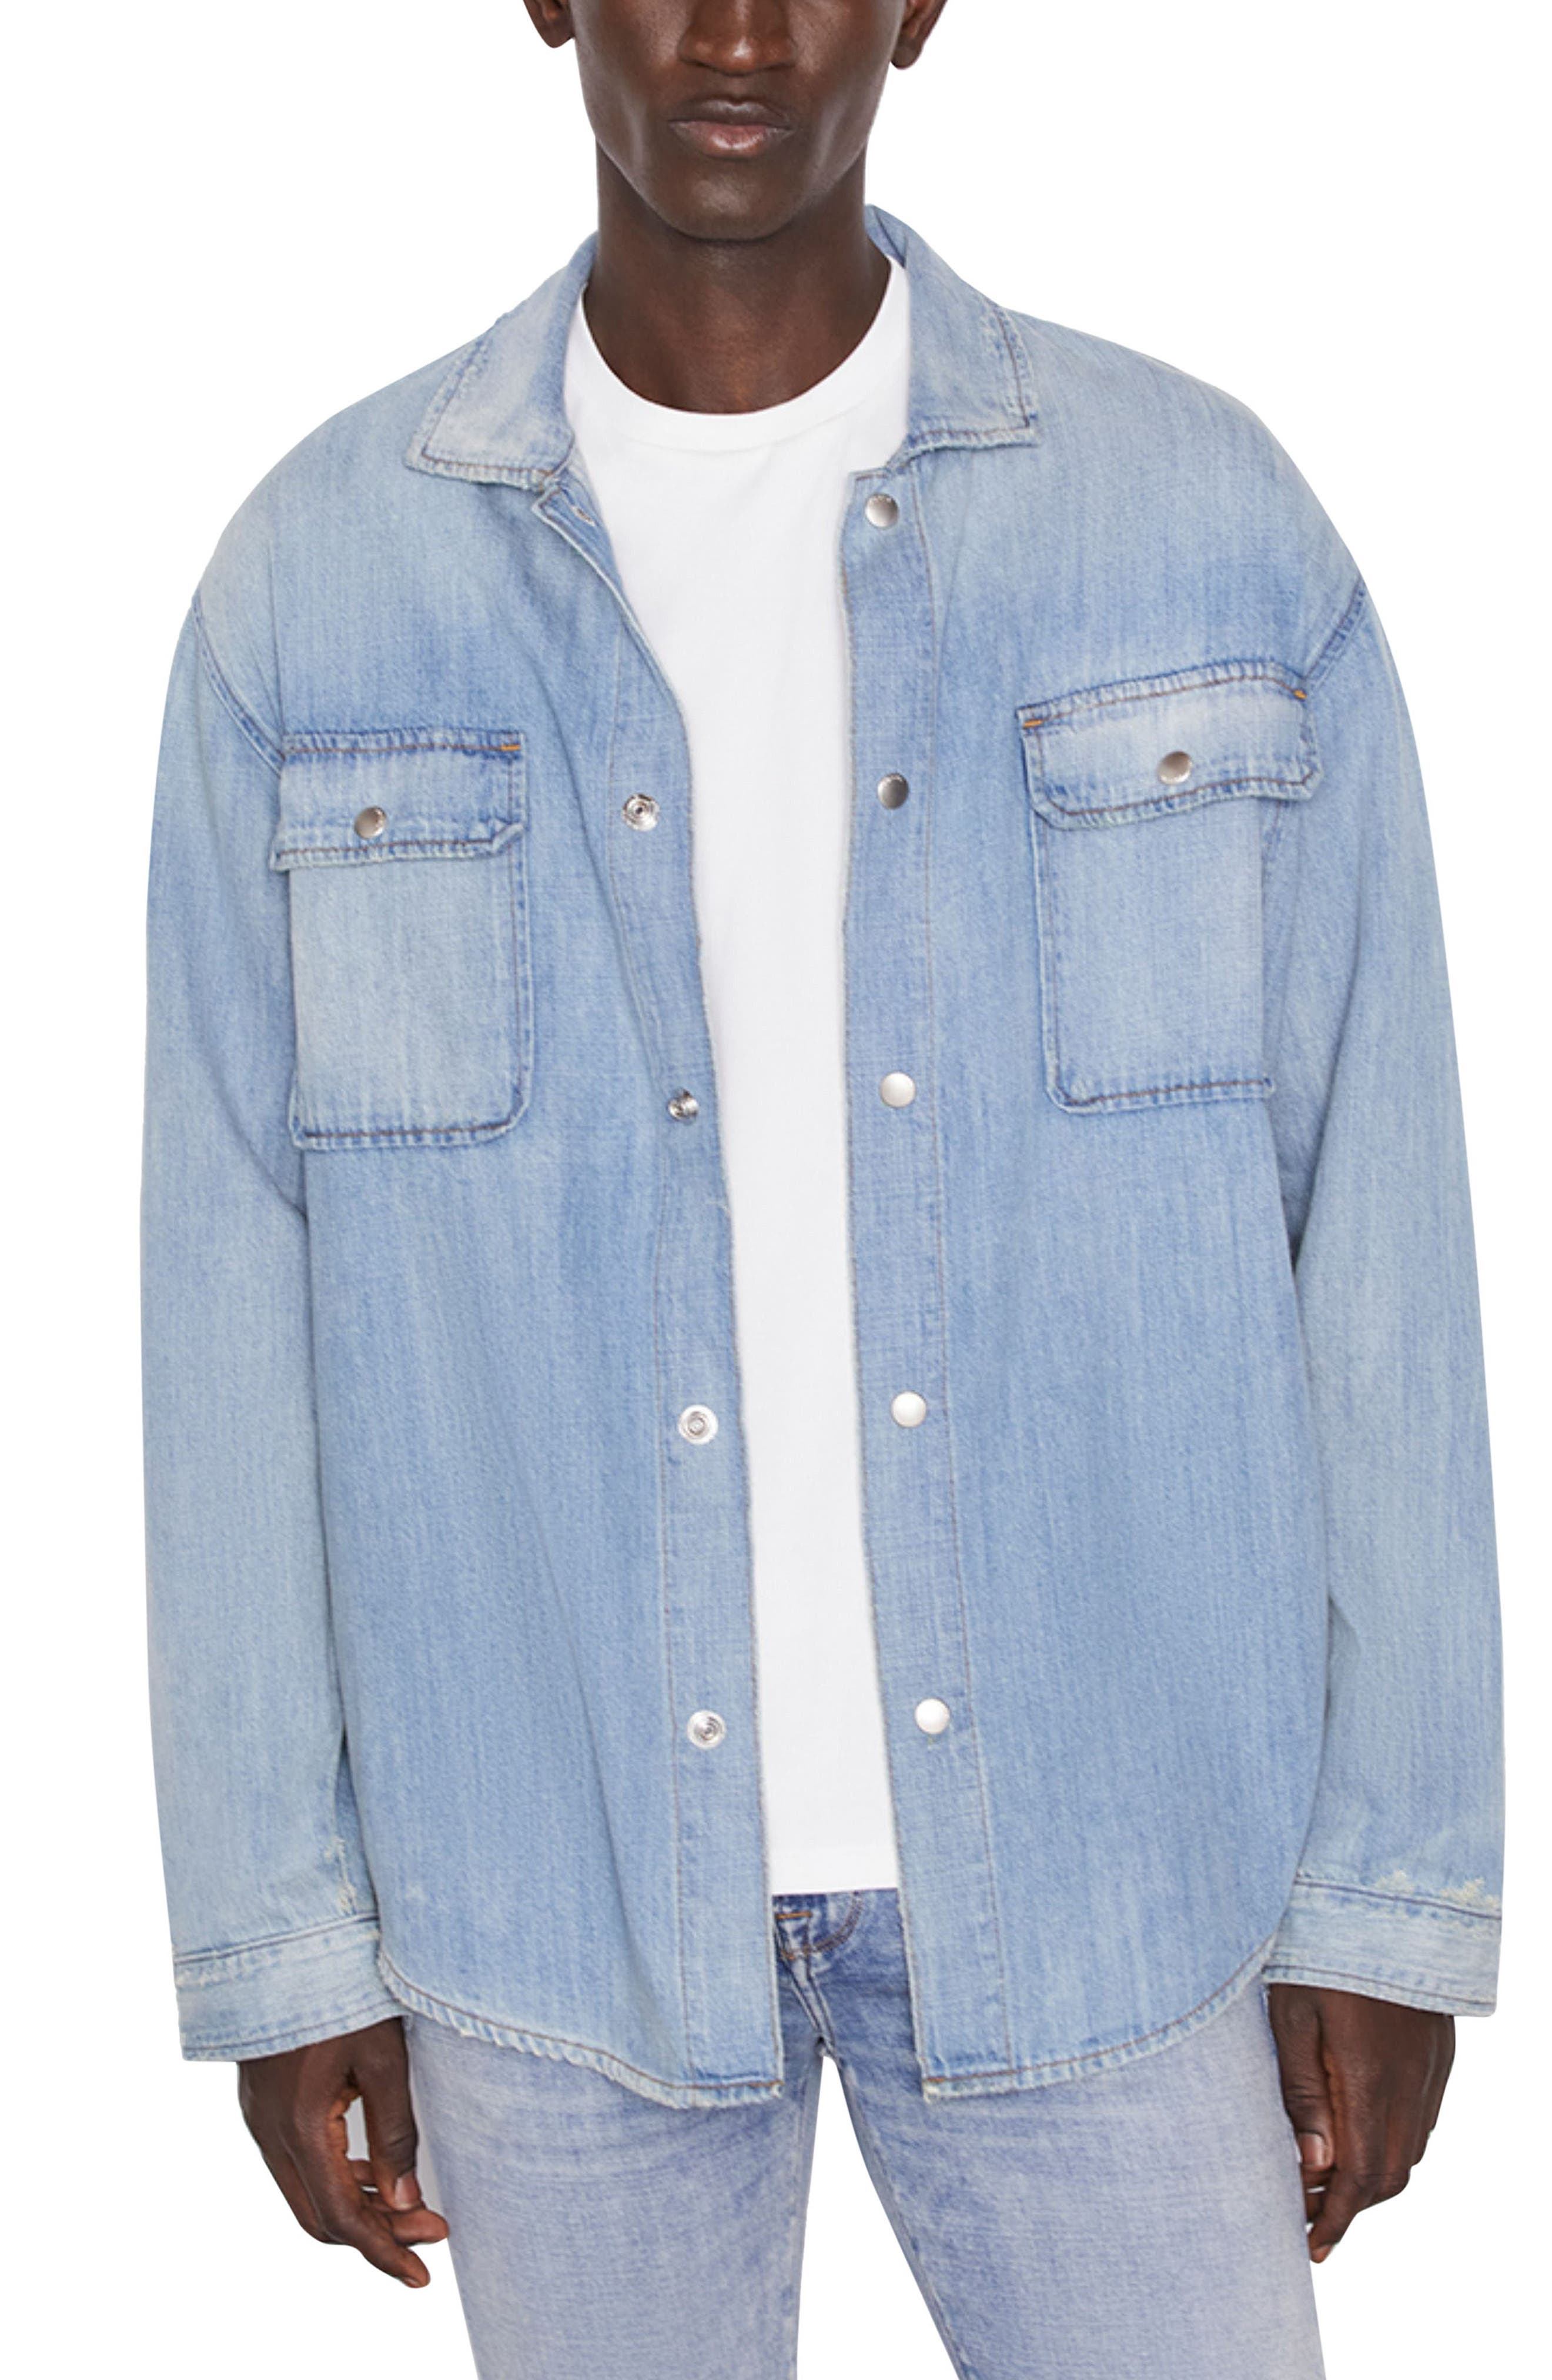 FRAME Denim Button-Up Shirt in Victoire at Nordstrom, Size Large